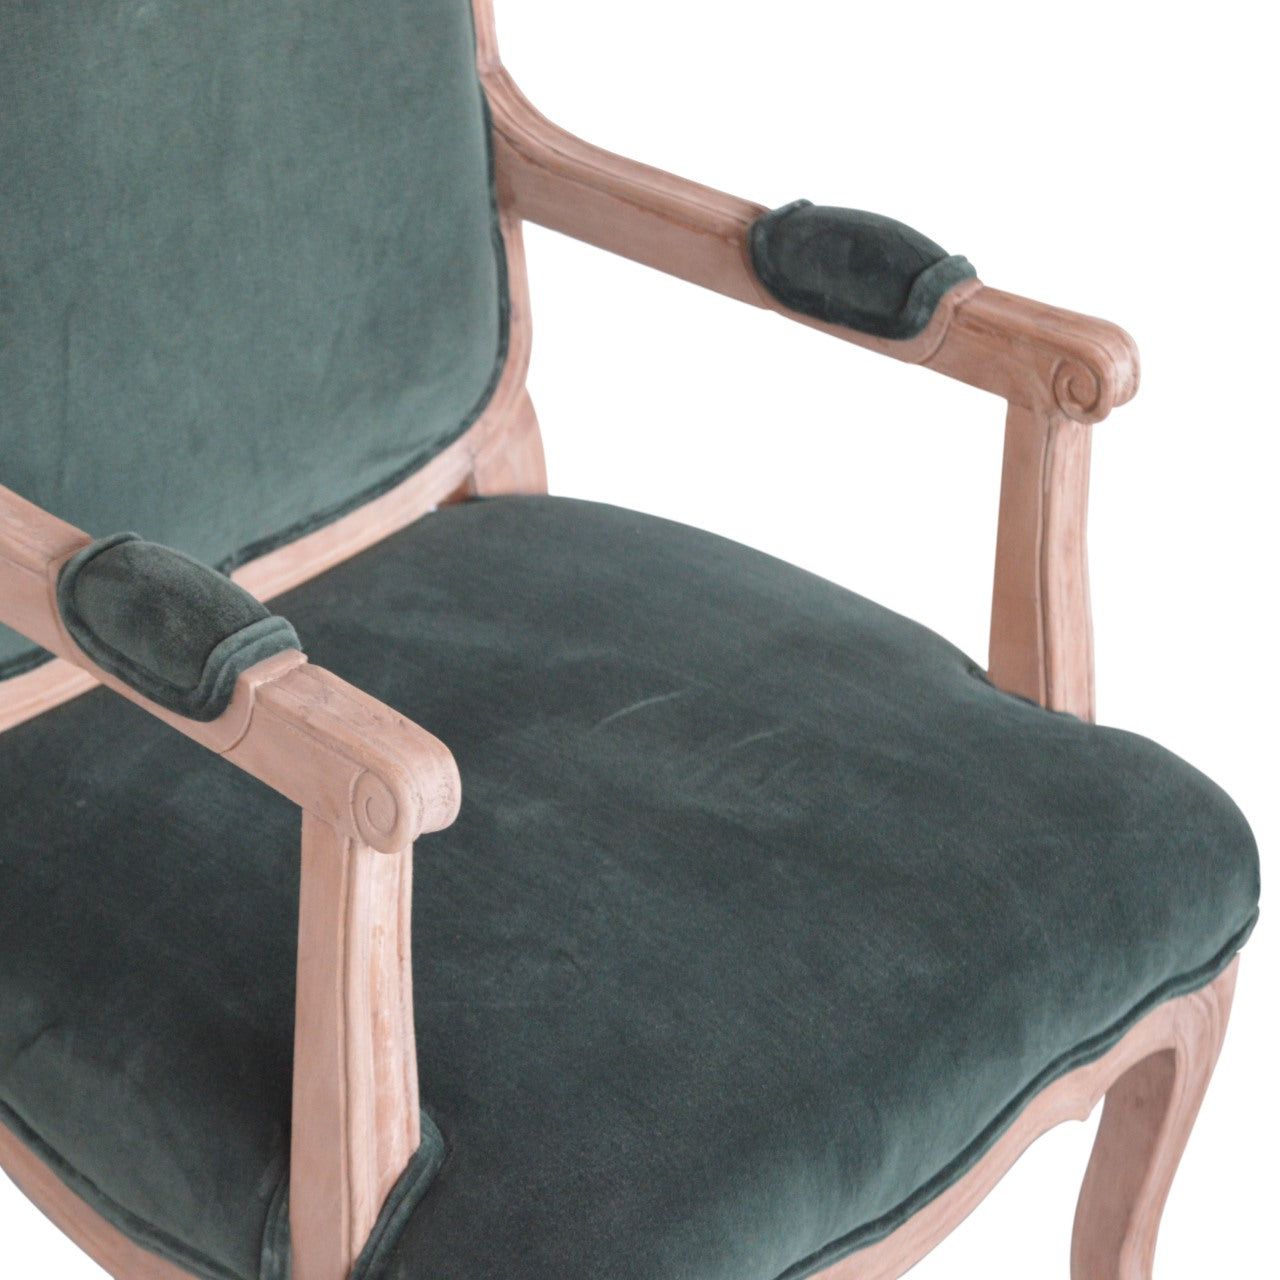 **SOLD OUT**Emerald Green Velvet French Style Chair